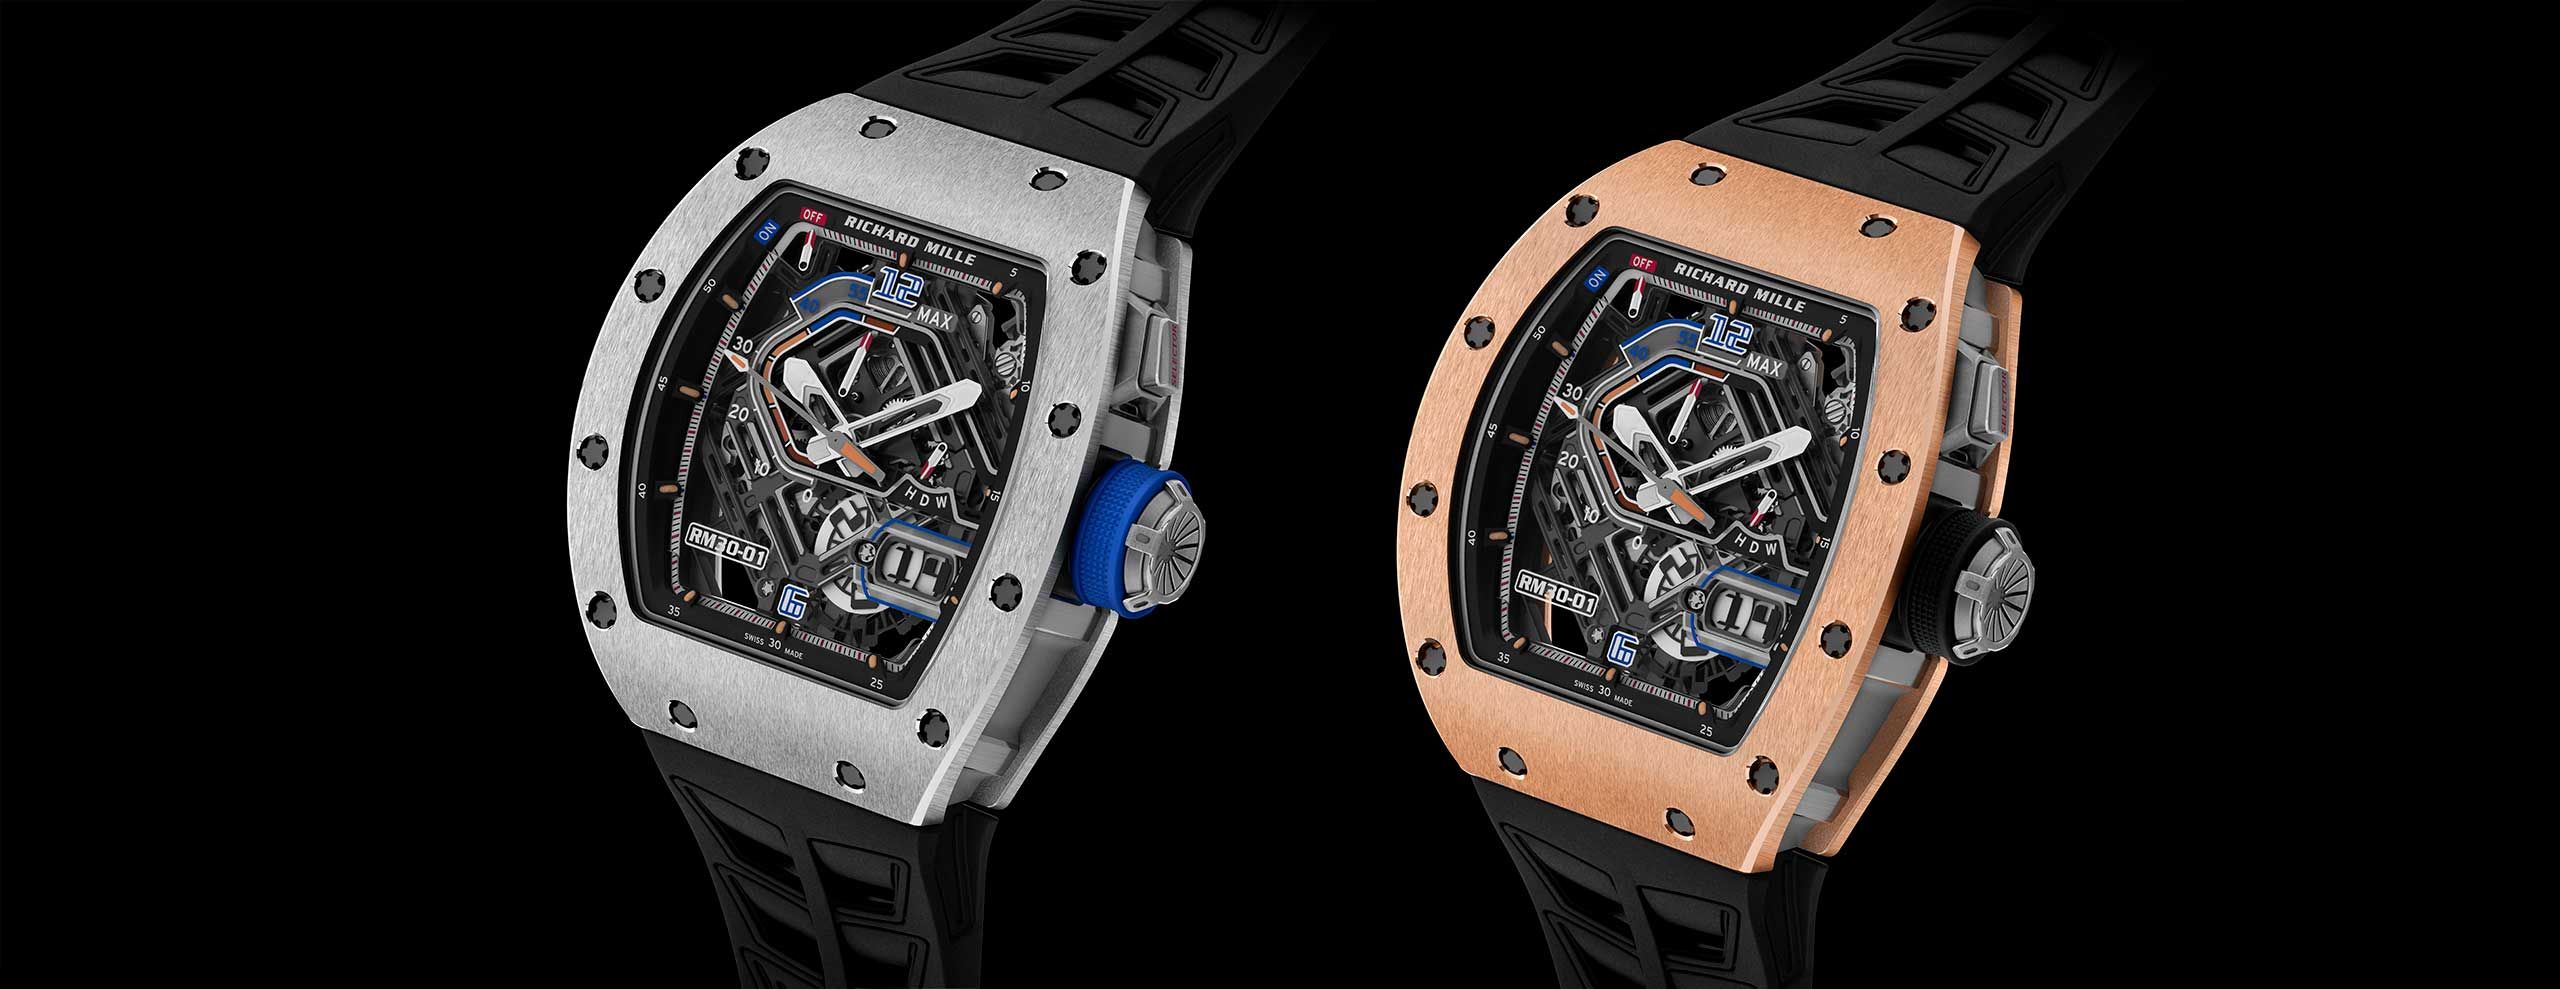 Richard Mille RM 30-01 with Declutchable Rotor